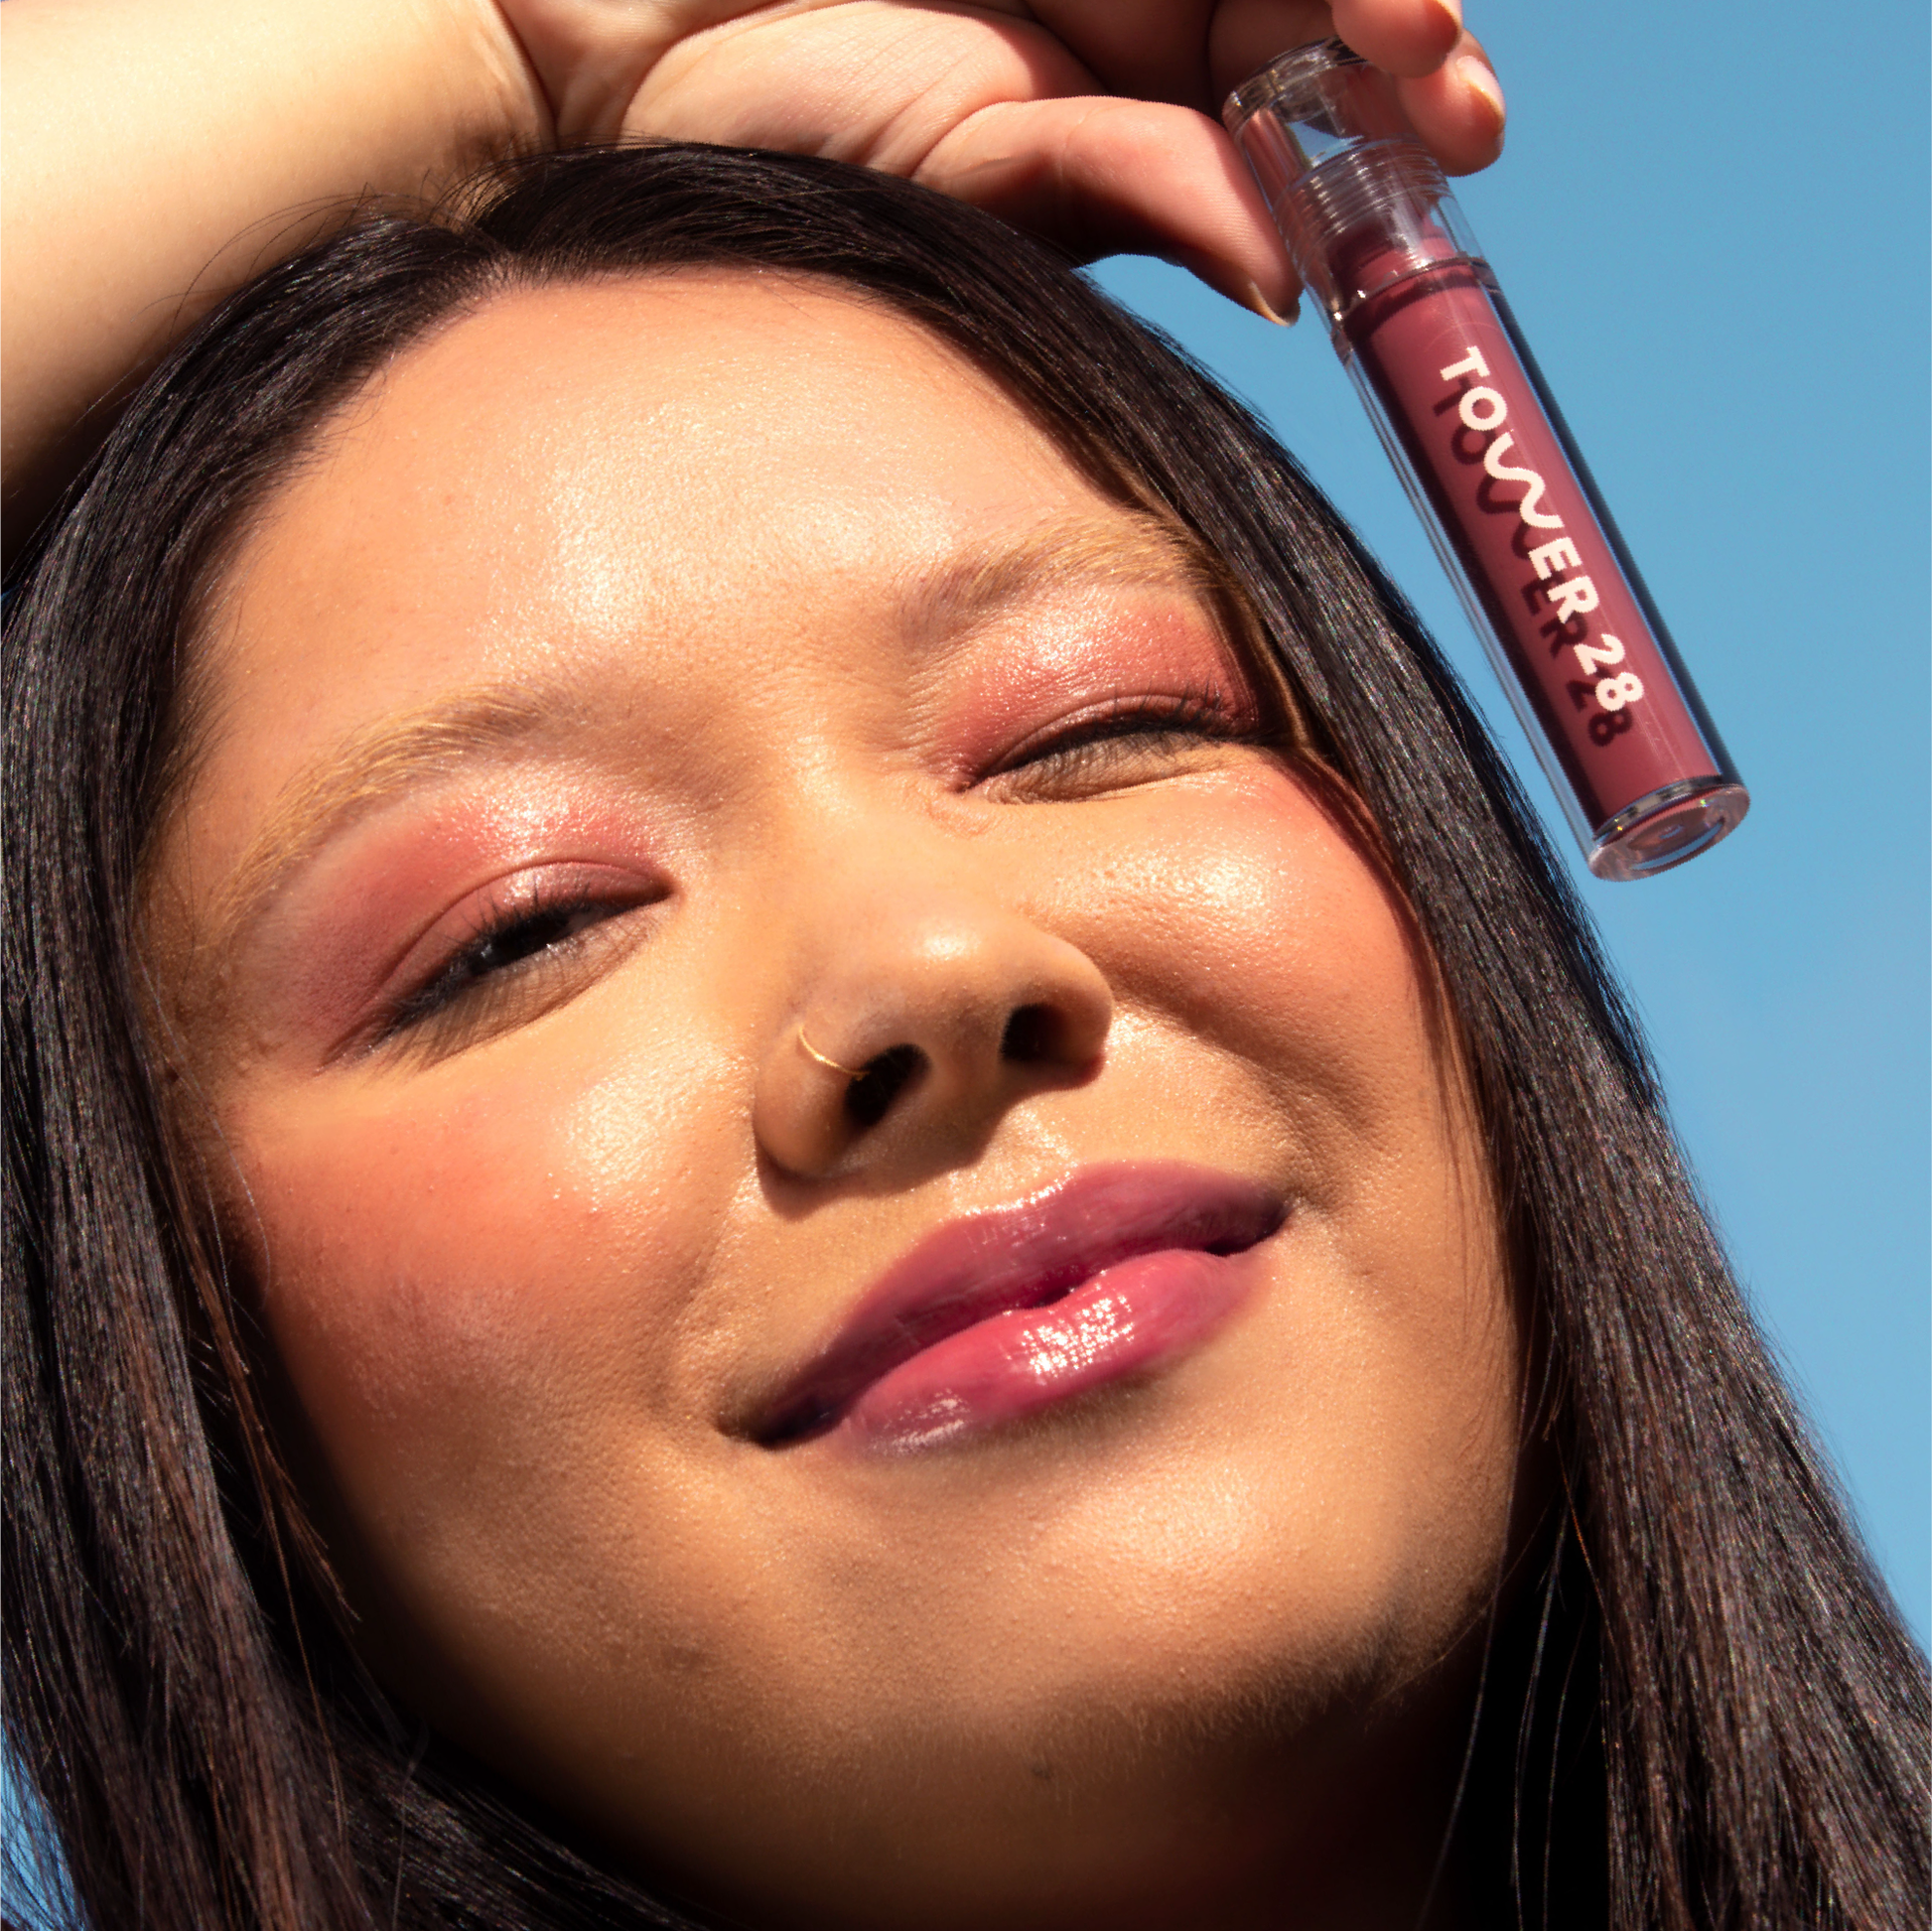 A model wearing the Tower 28 Beauty ShineOn Lip Jelly in the shade Sesame on her lips